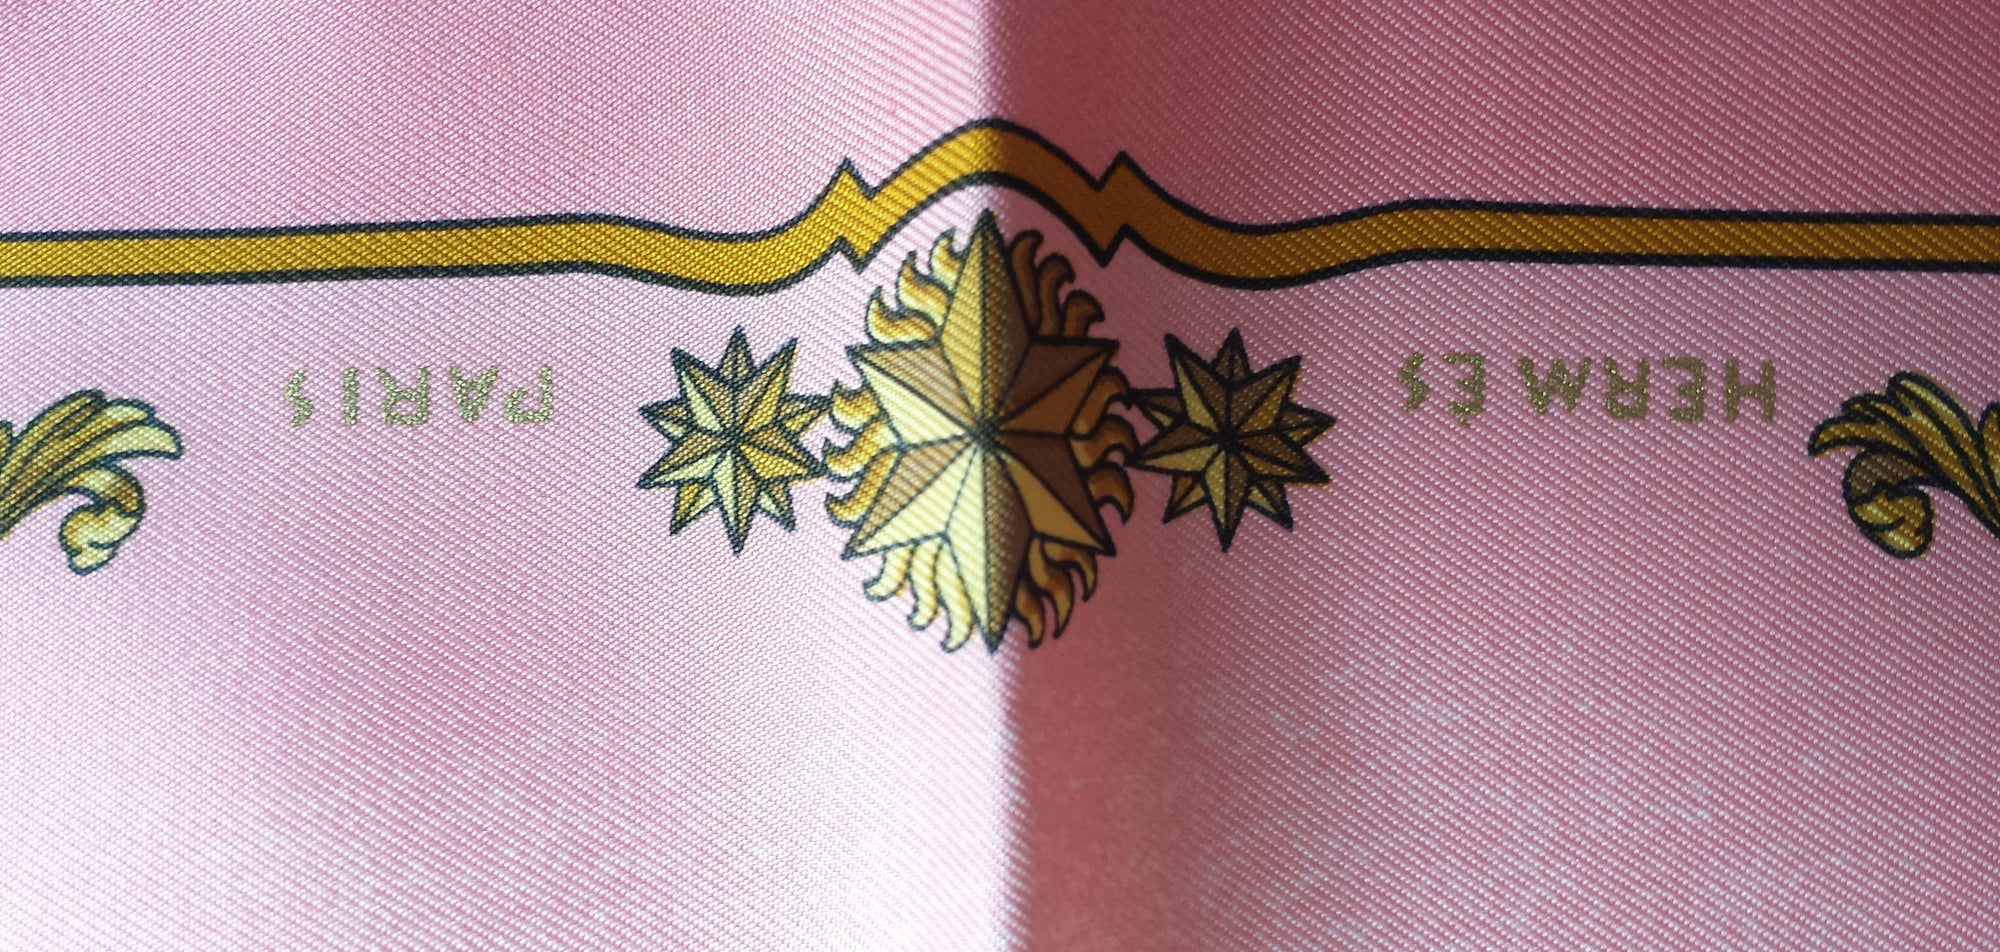 Authentic Hermès 'Cosmos', 42cm/16inch, Pink Silk Scarf by Philippe Ledoux